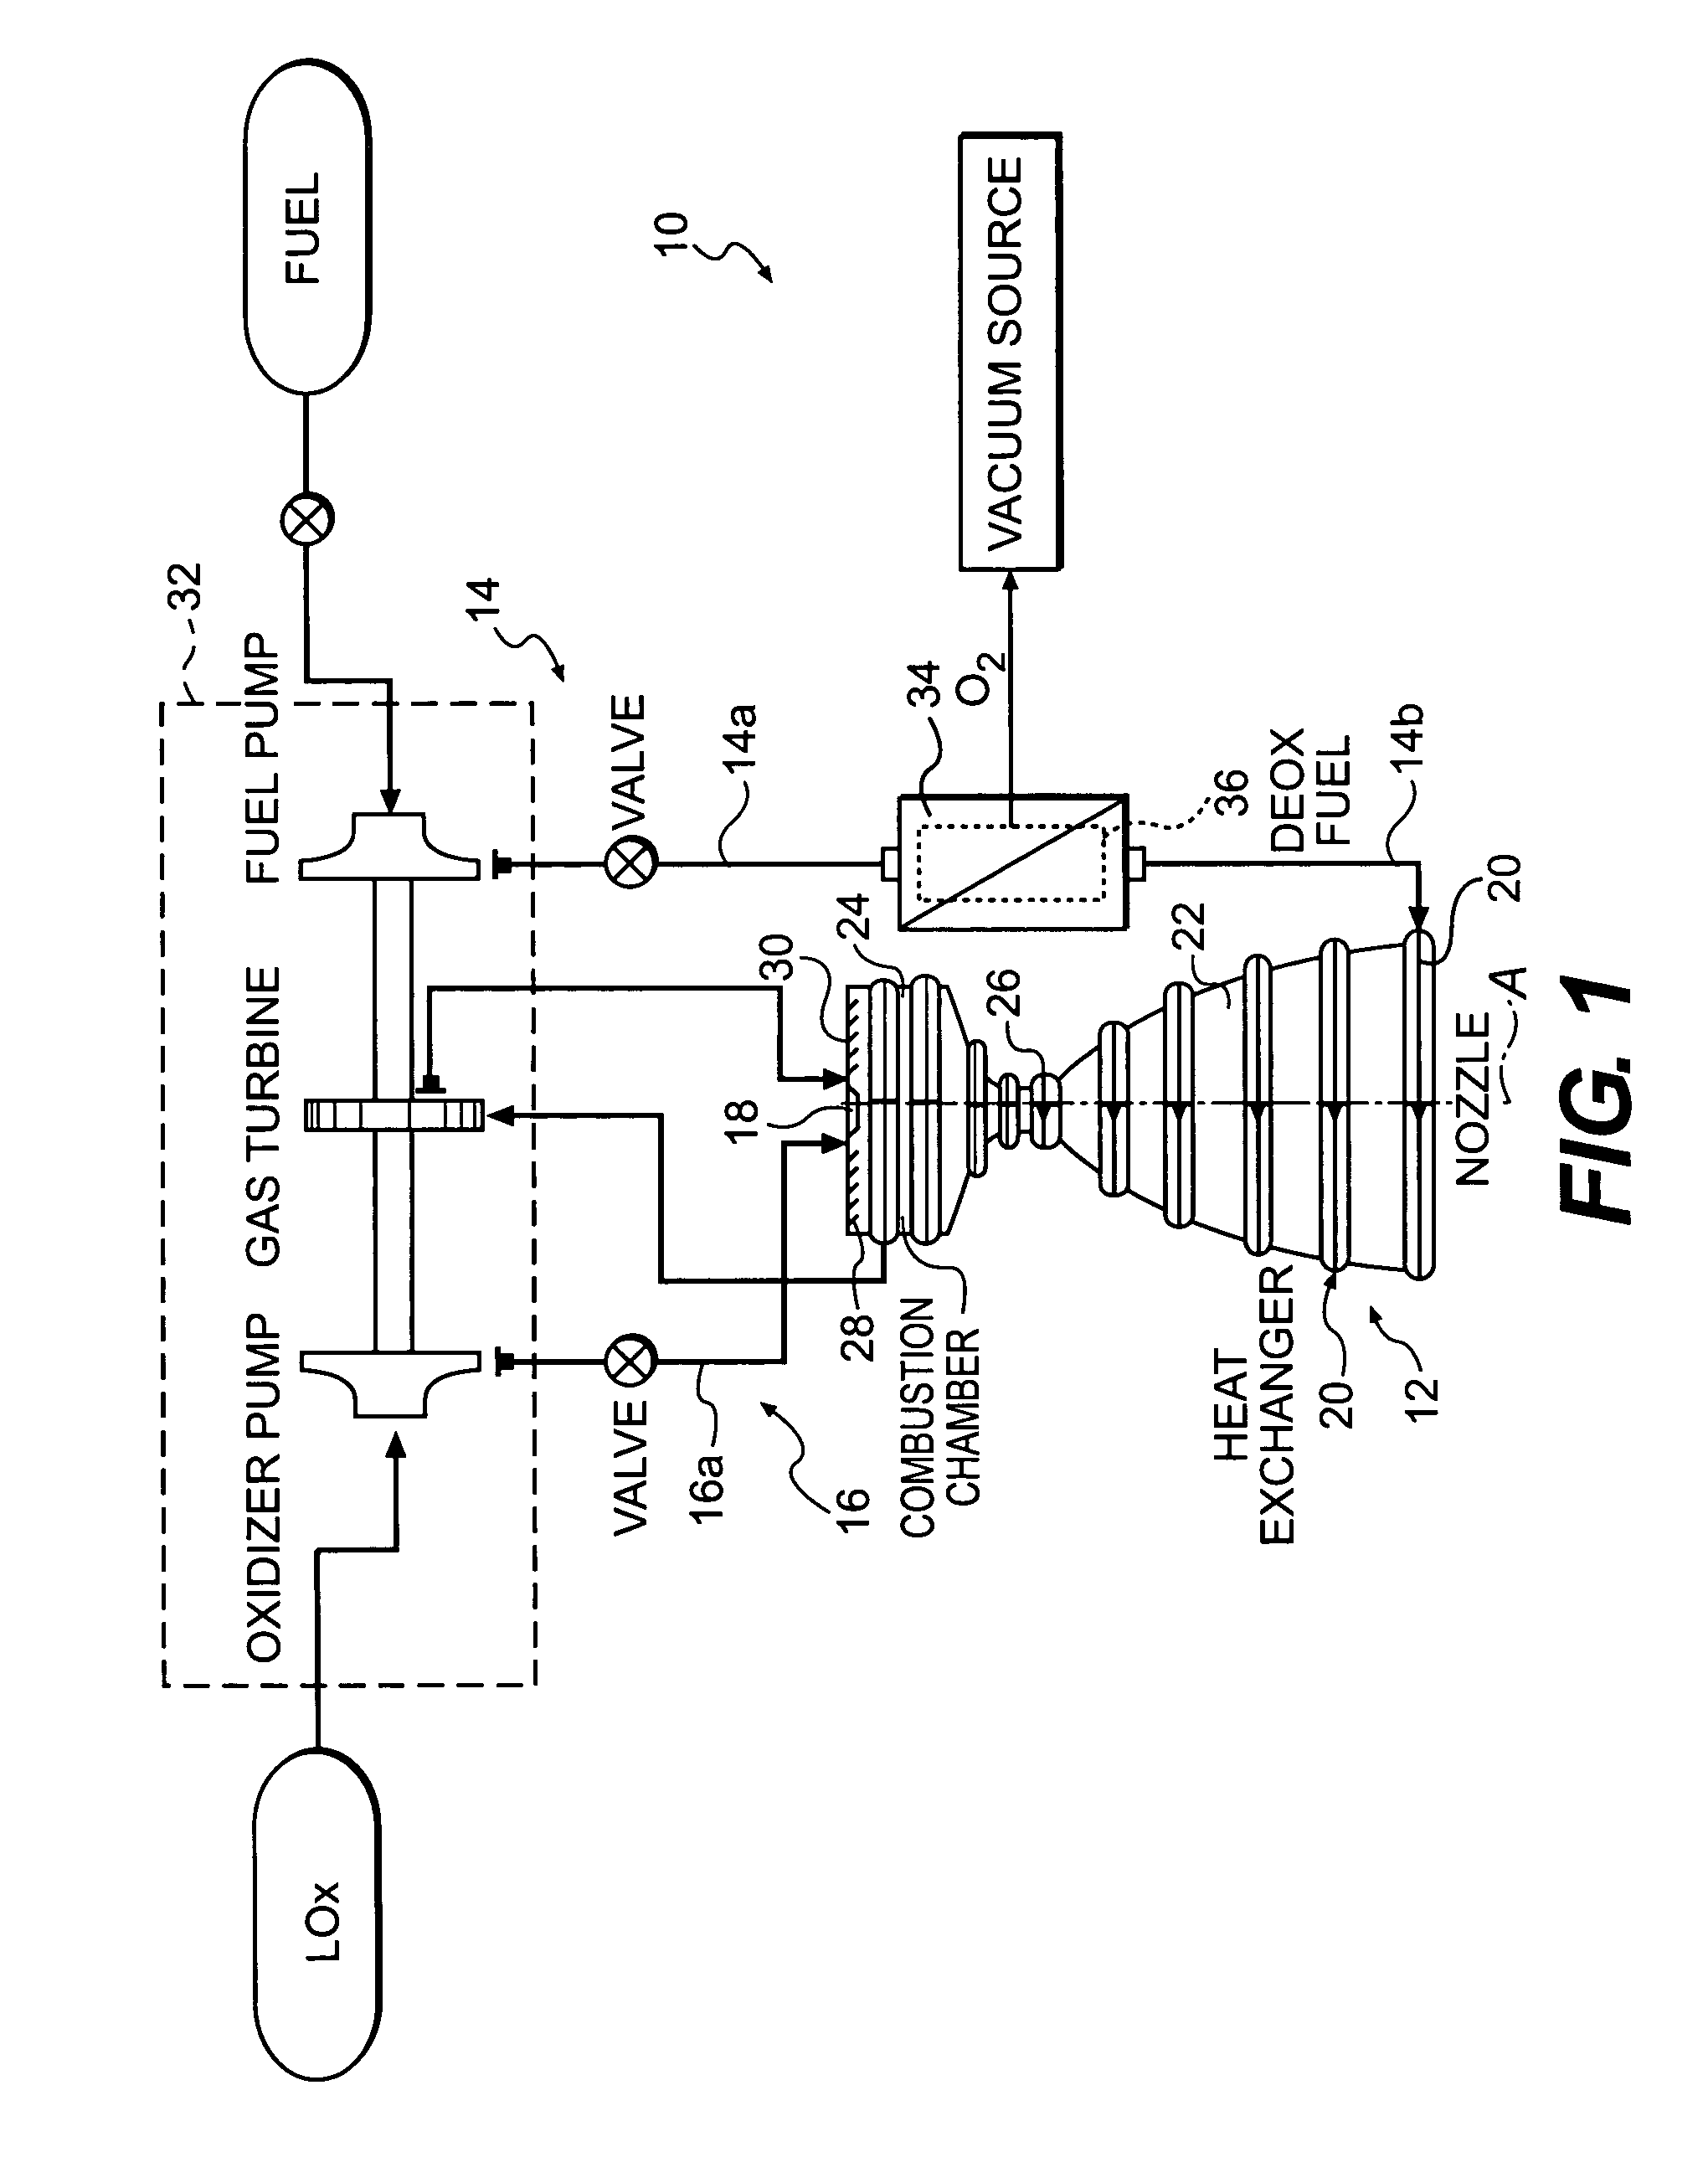 Hydrocarbon-fueled rocket engine with endothermic fuel cooling